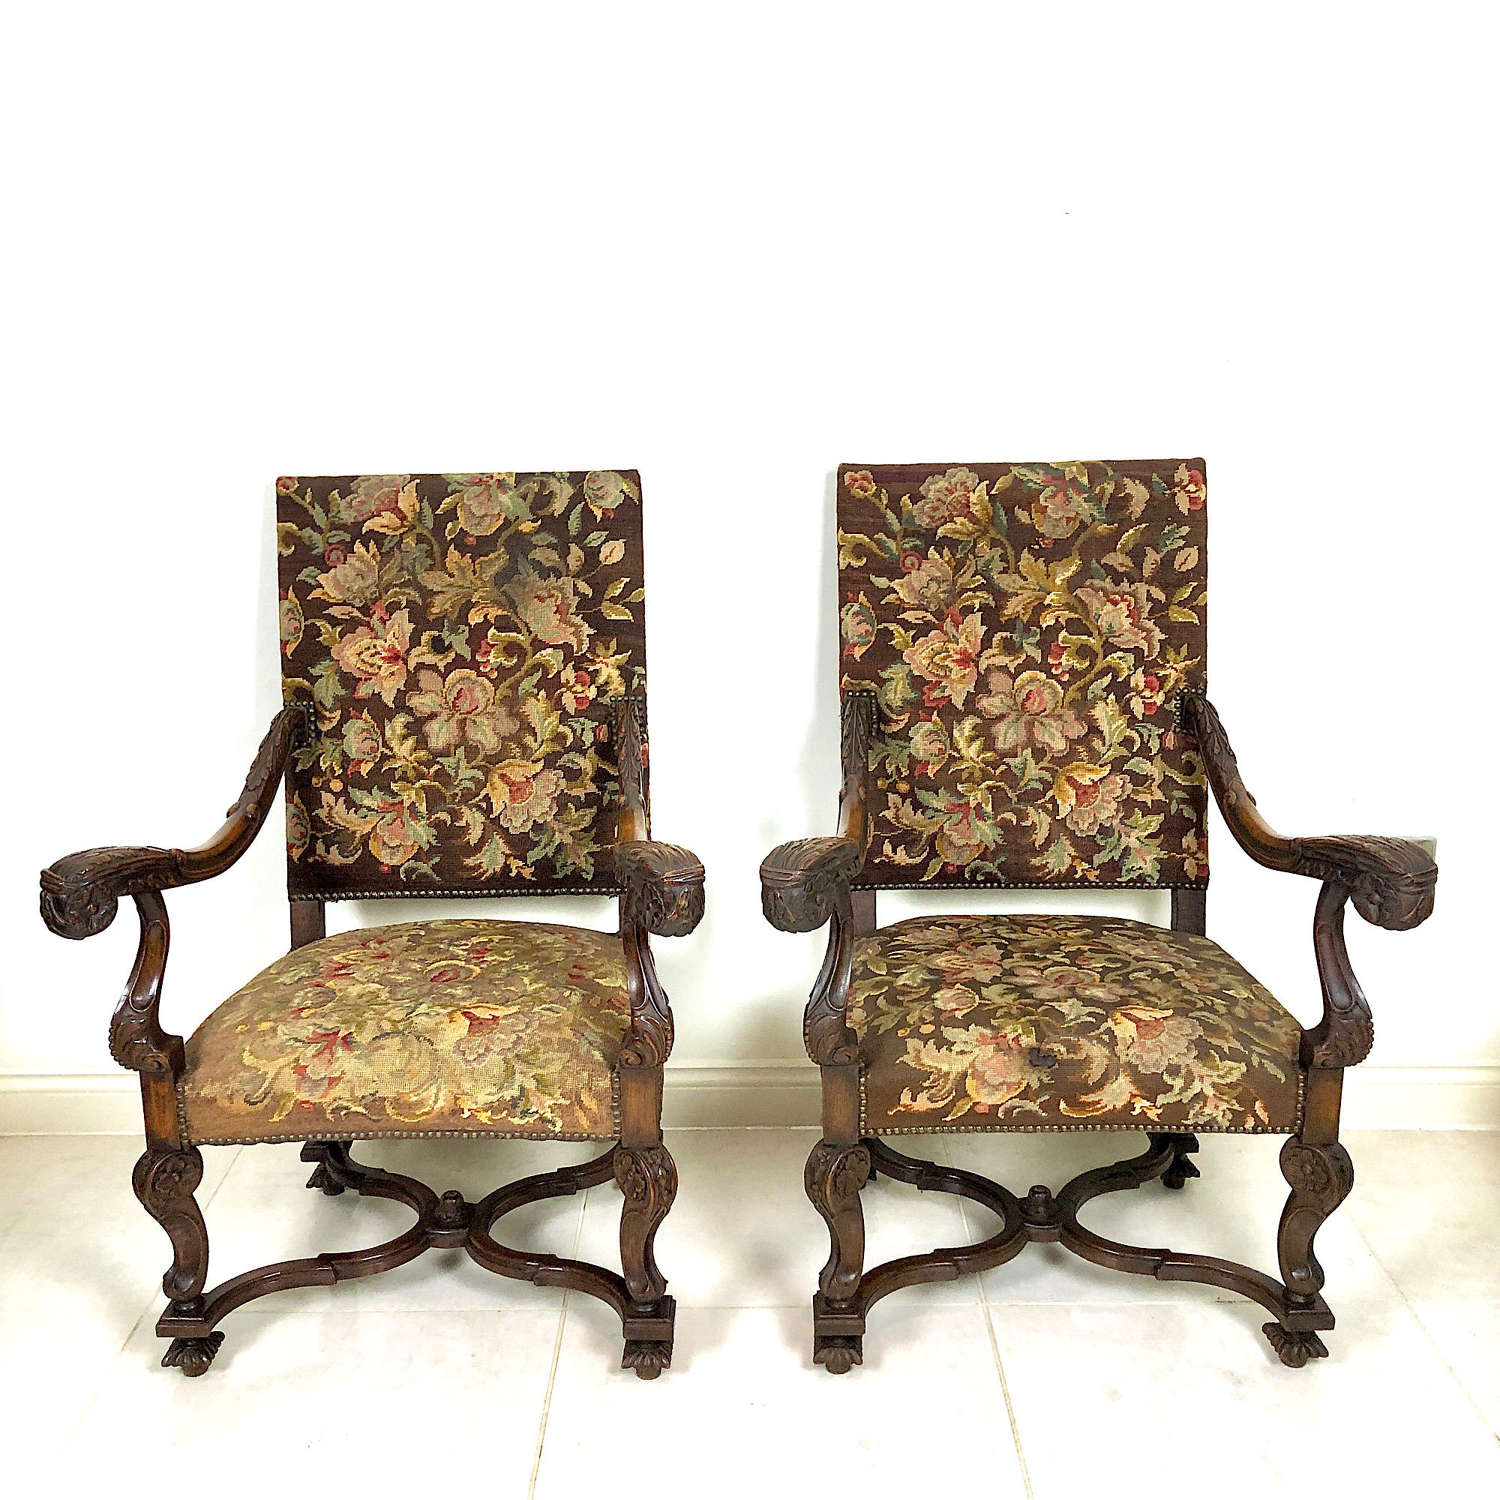 A large pair of Throne Chairs